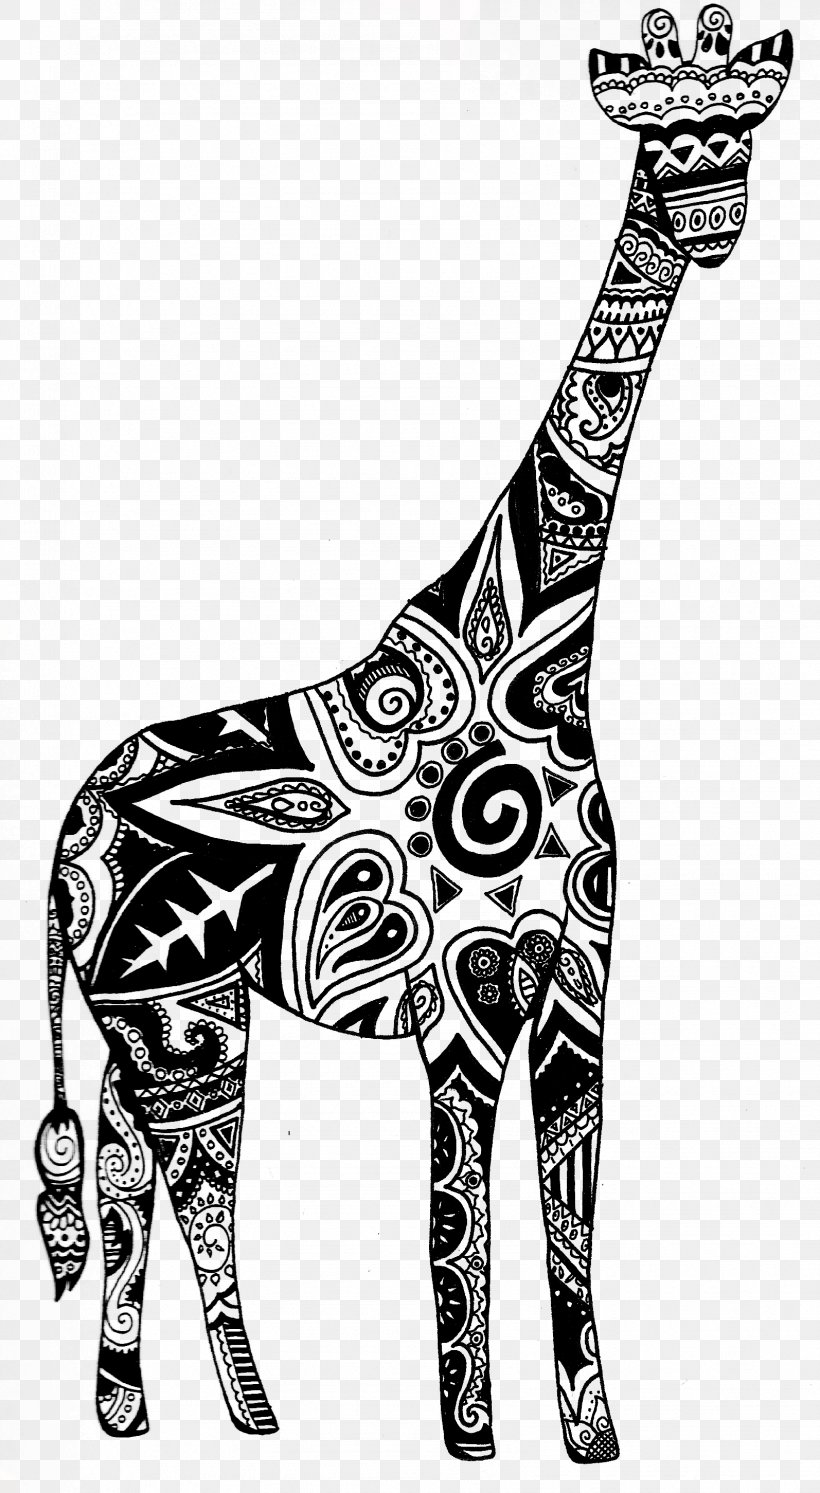 Giraffe Henna Drawing Poster Clip Art, PNG, 1594x2904px, Giraffe, Art, Black And White, Child, Coloring Book Download Free